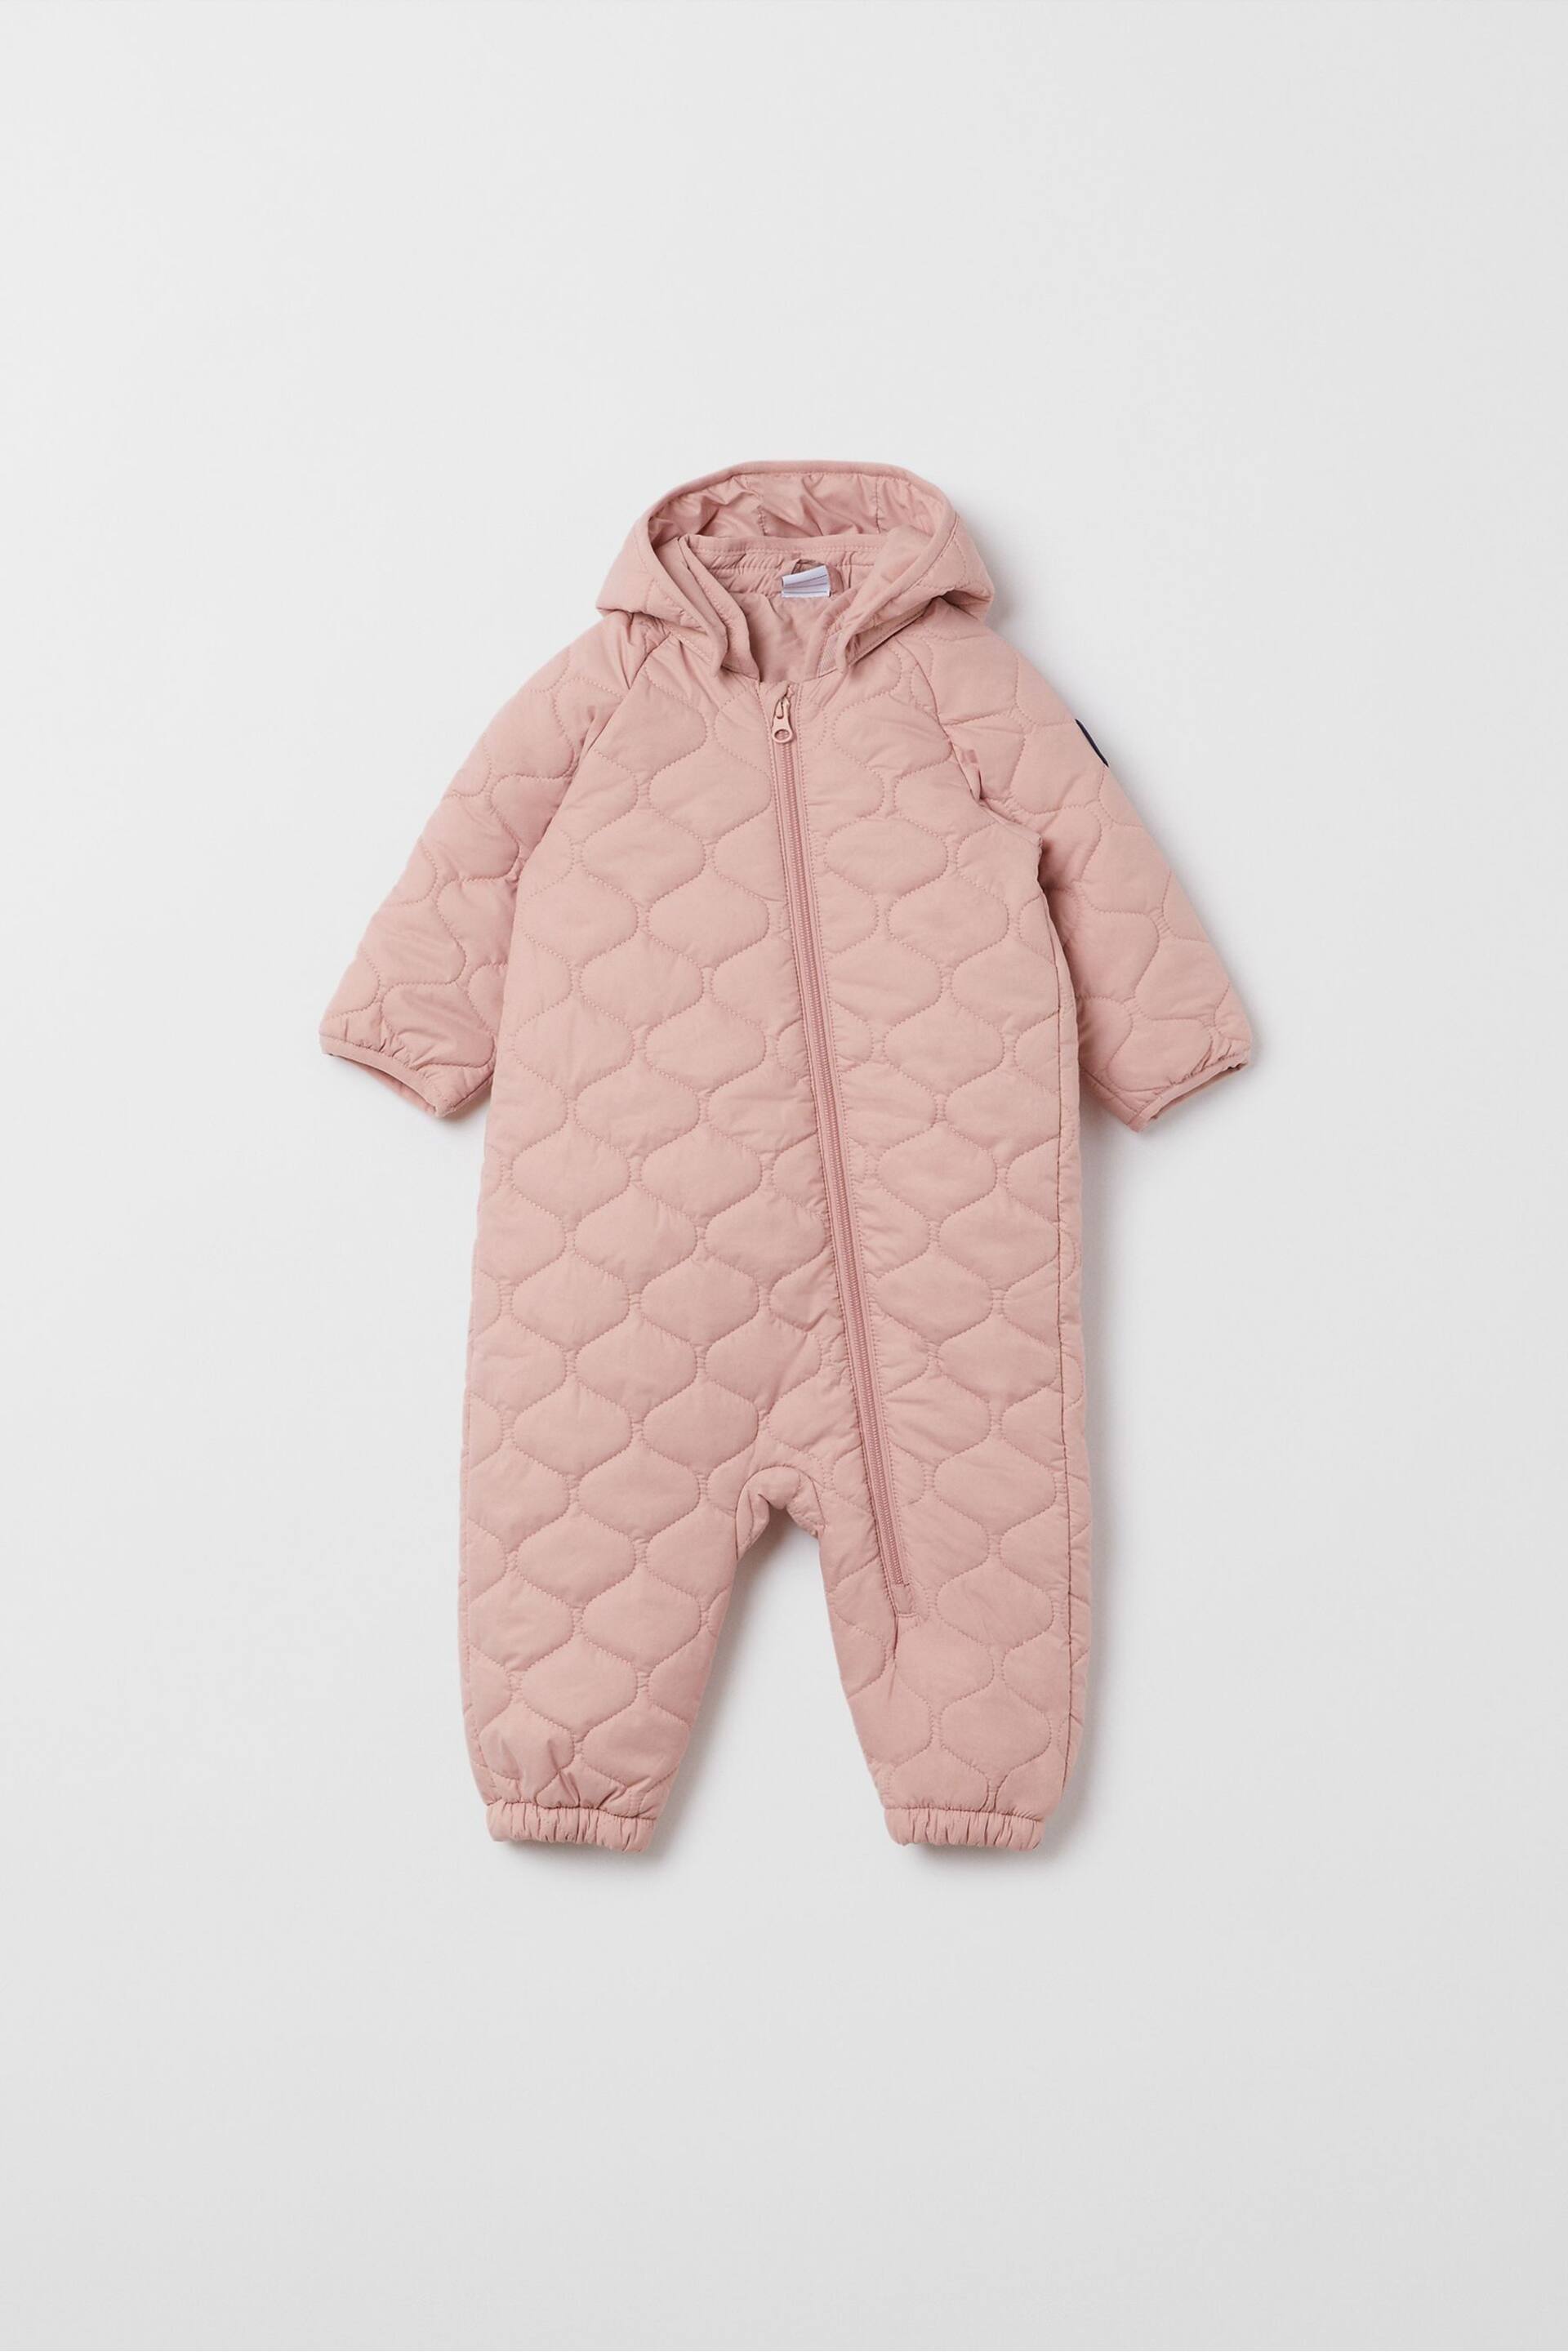 Polarn O Pyret Pink Windproof Padded Pramsuit - Image 2 of 6